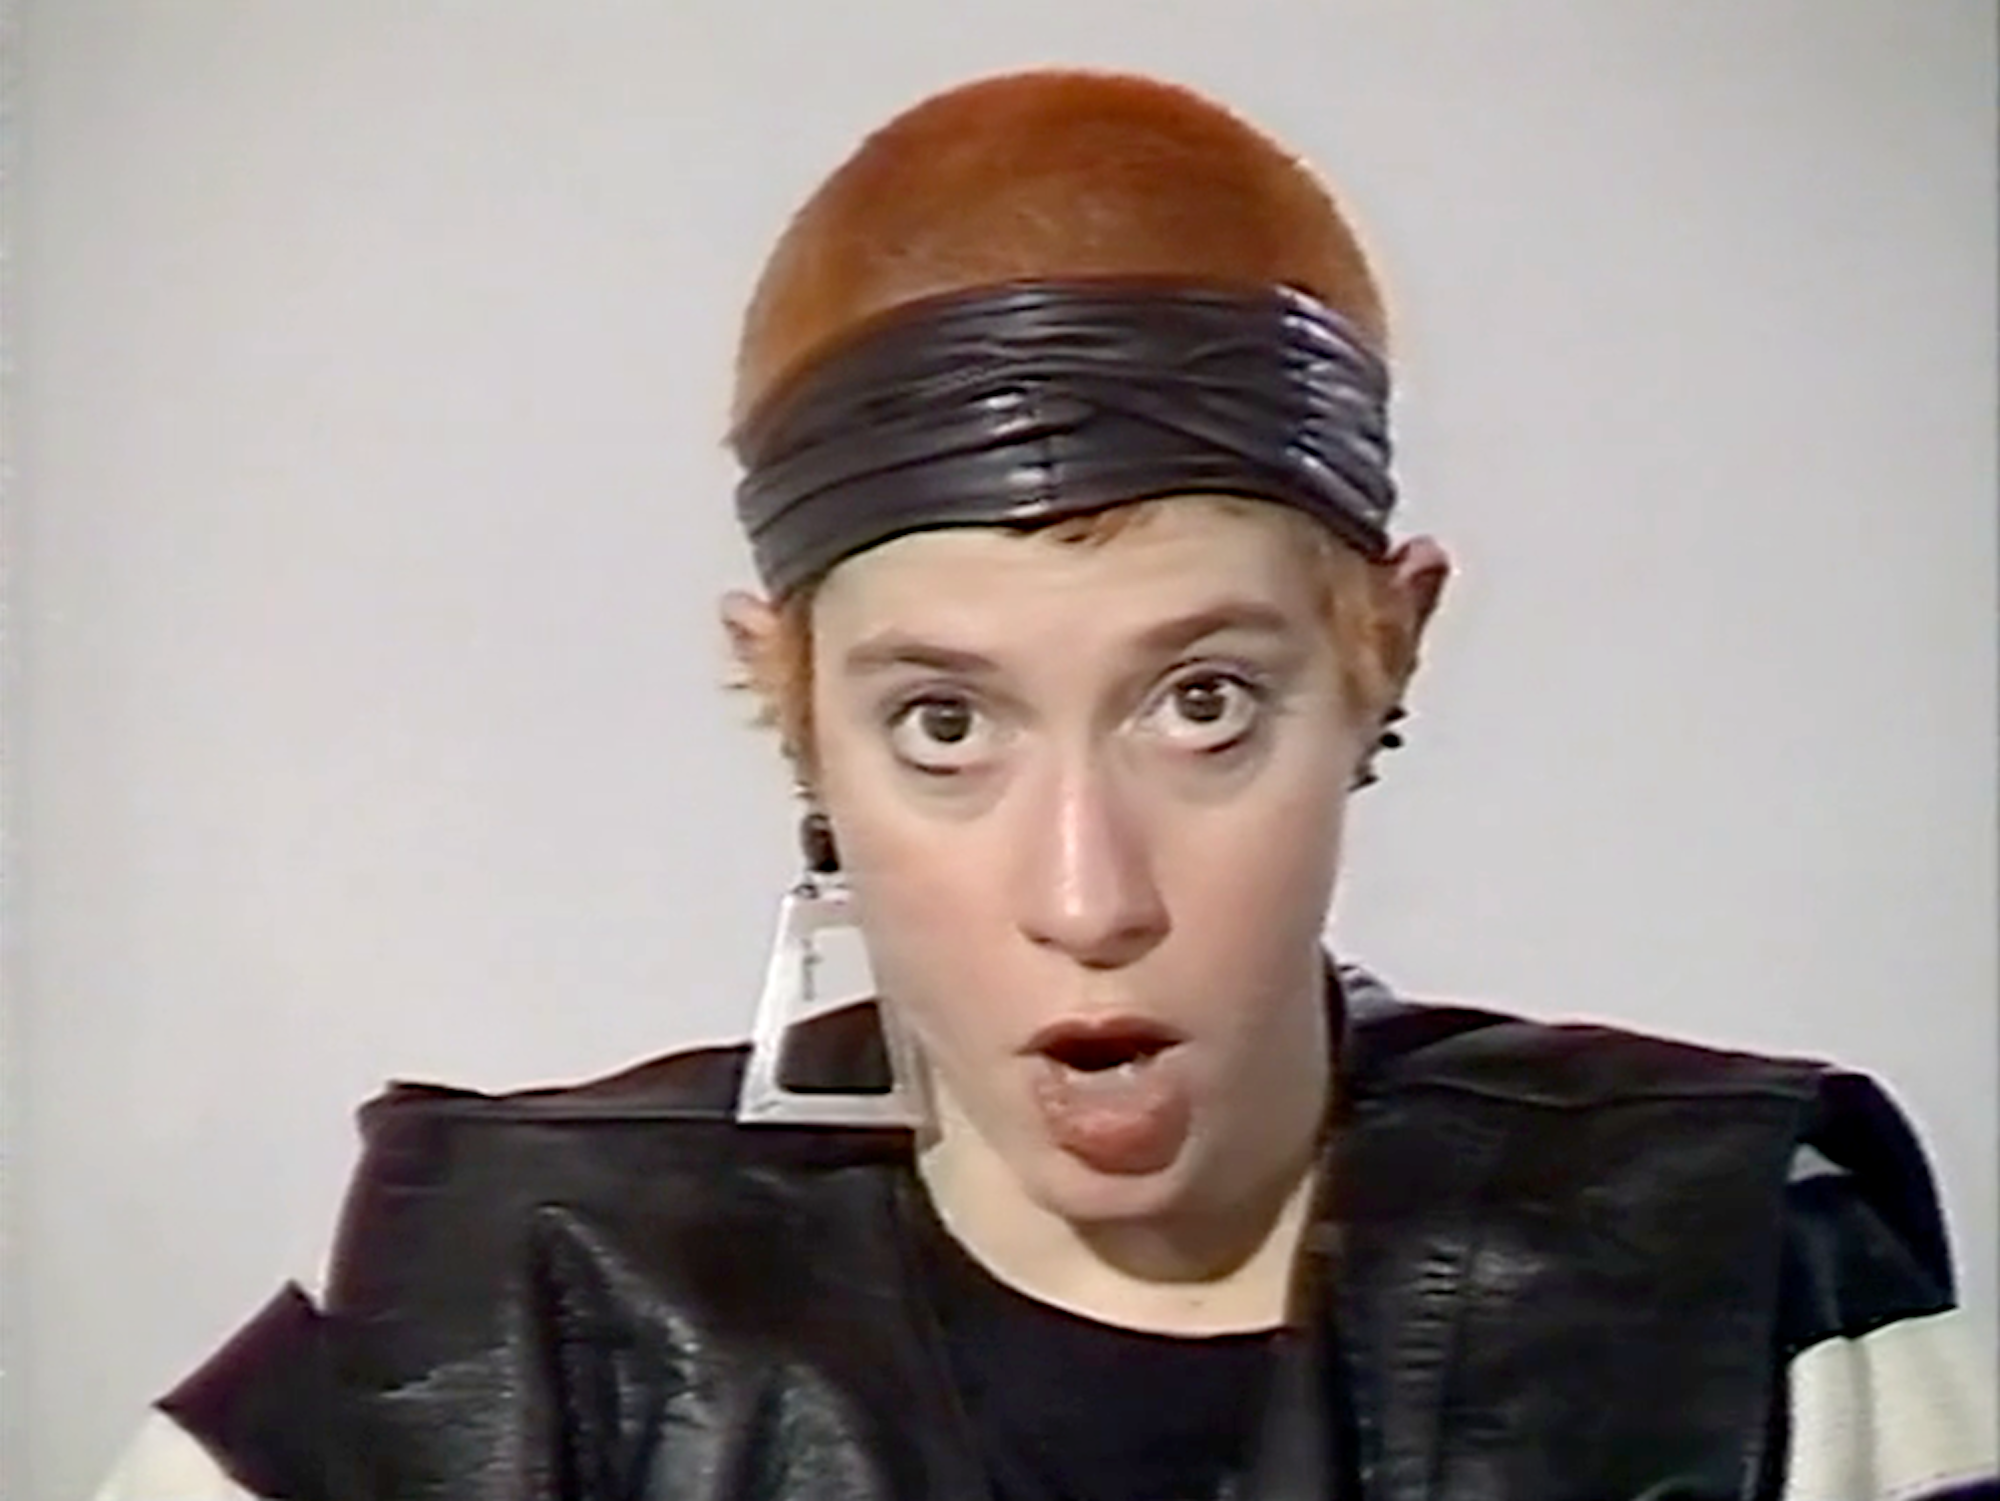 Kathy Acker in conversation with Angela McRobbie at the Institute of Contemporary Arts, 1987. Copyright ICA, London